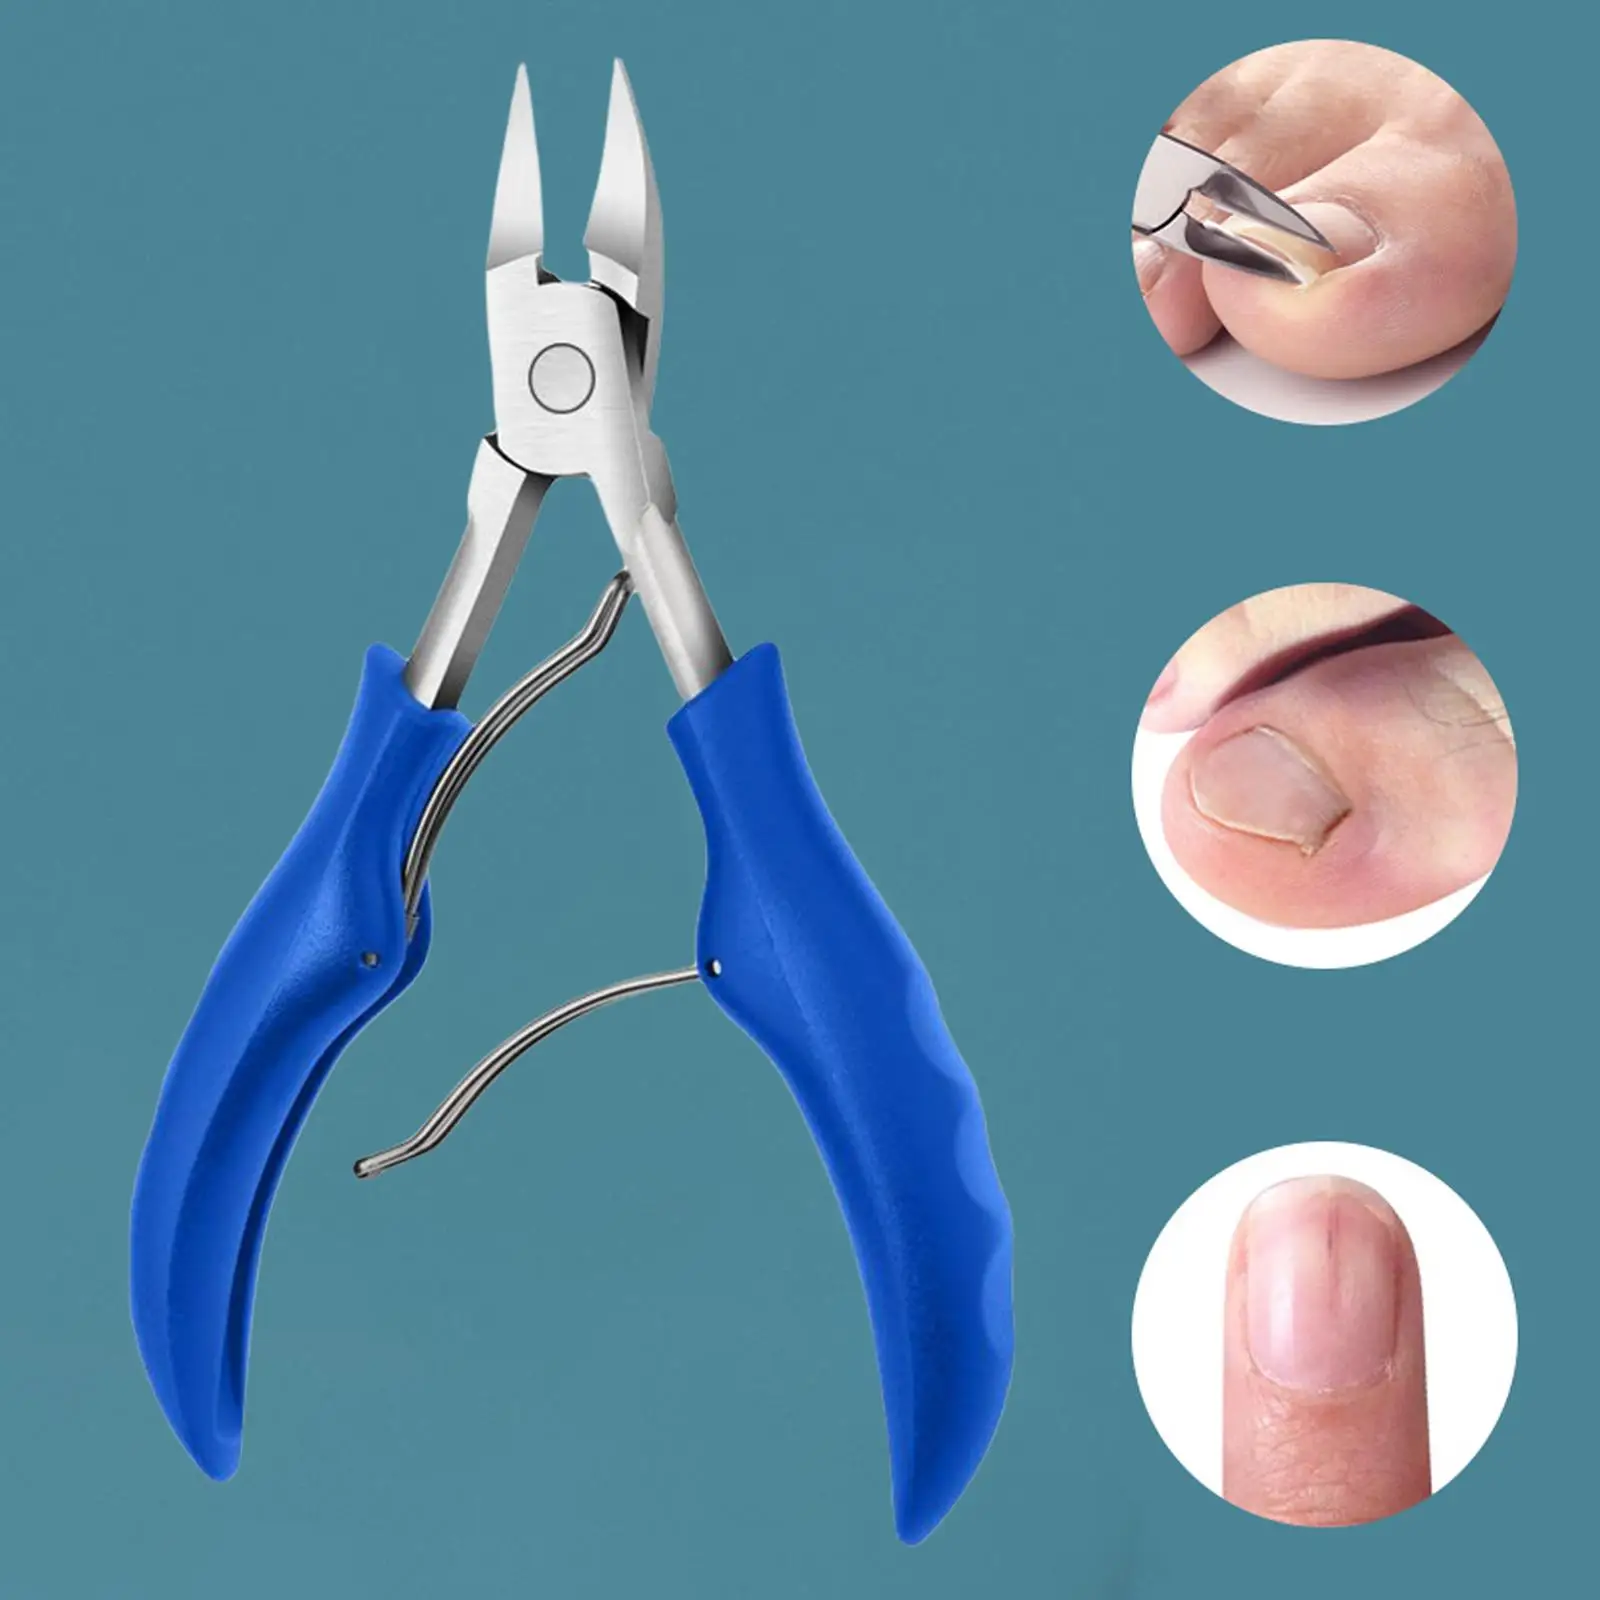 Olecranon Nail s Stainless Solid Tool for Thick Toenails Seniors